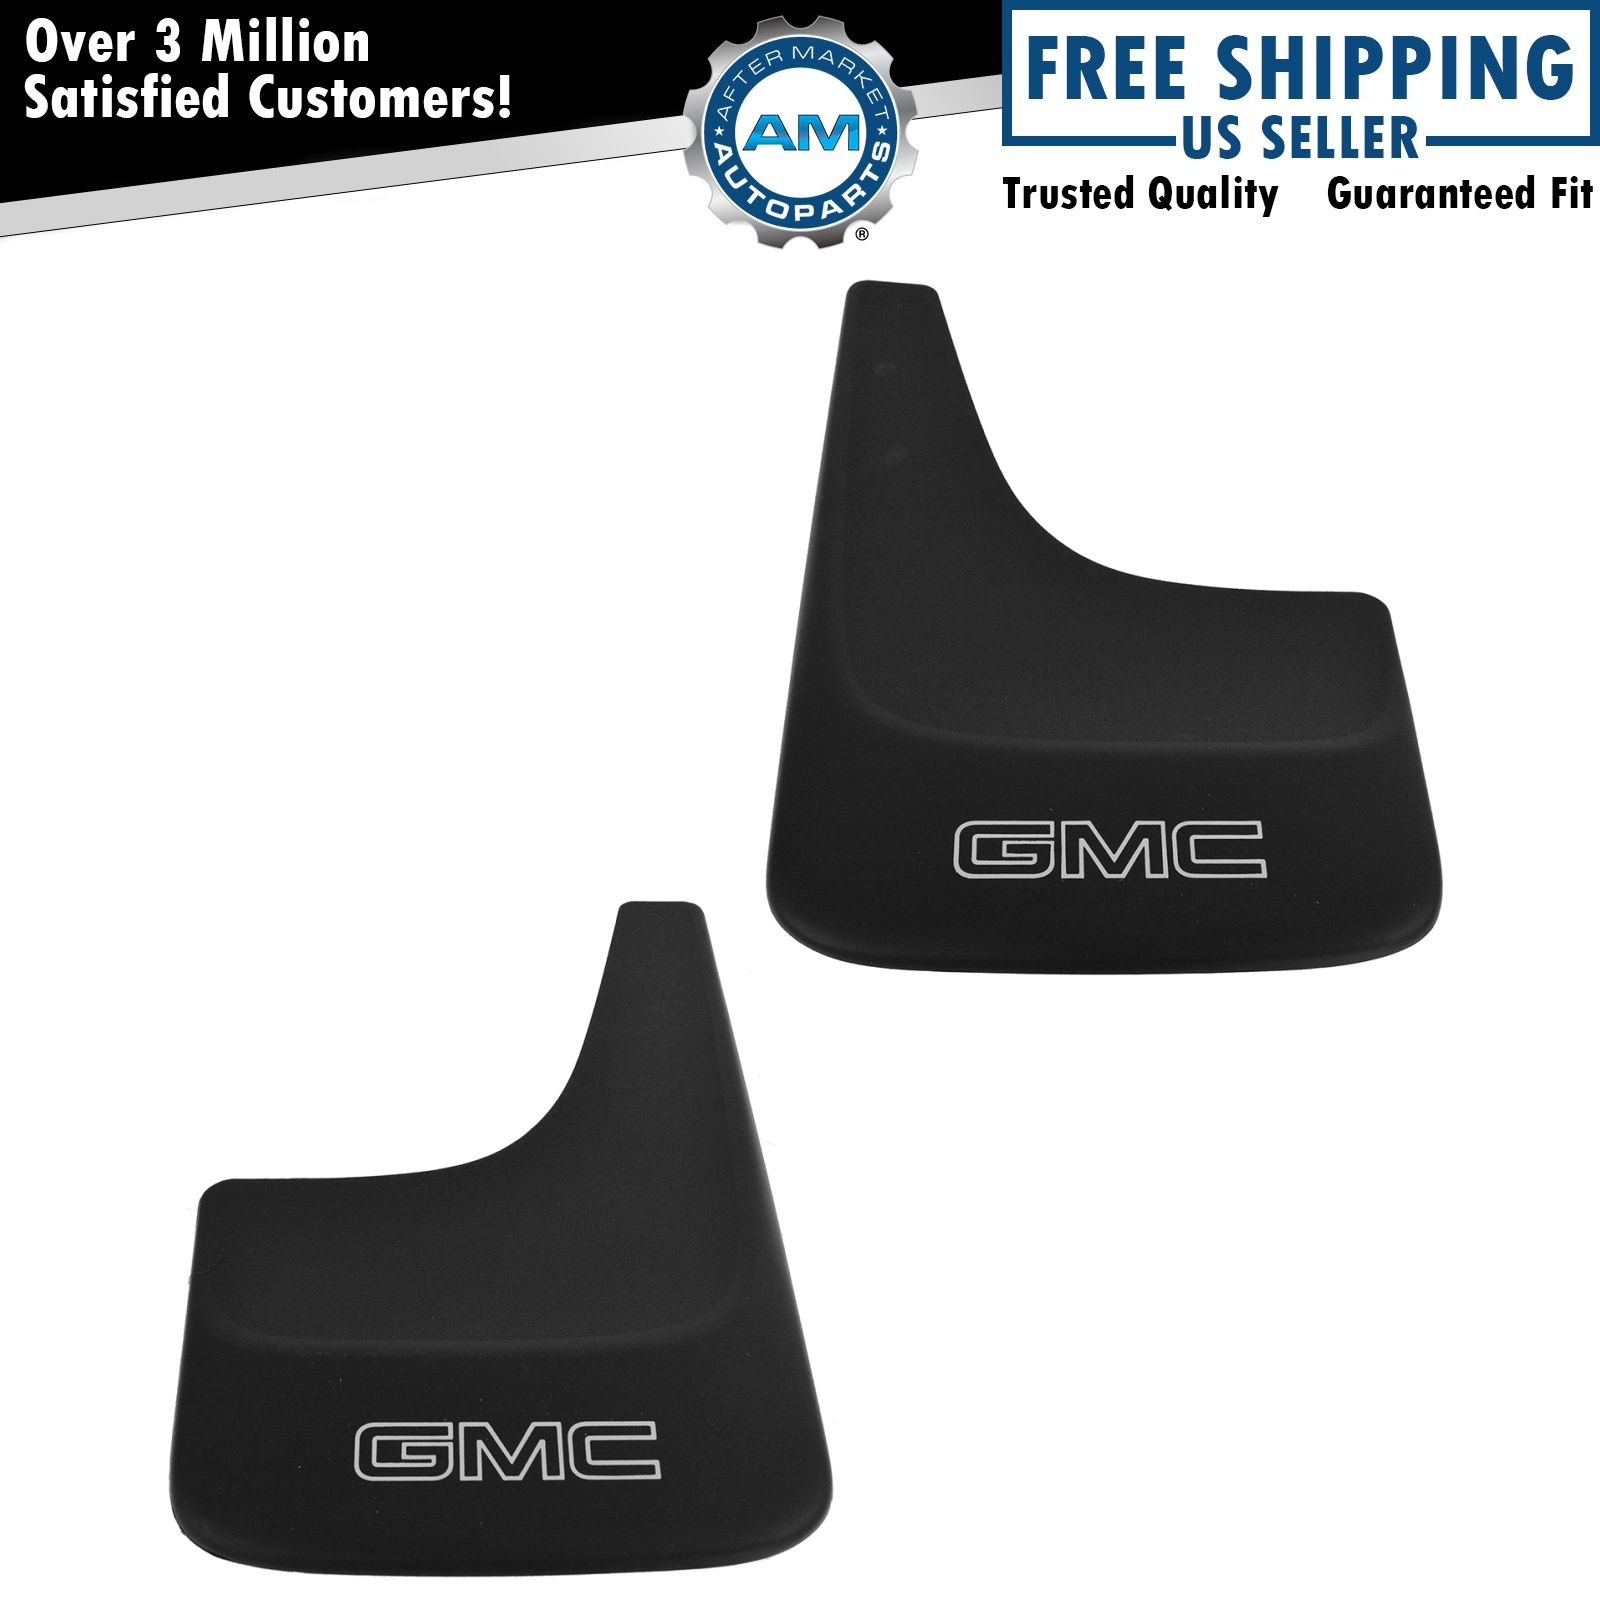 OEM 19213394 Splash Guard Mud Flap 12 Inch Wide Front or Rear Pair for GMC